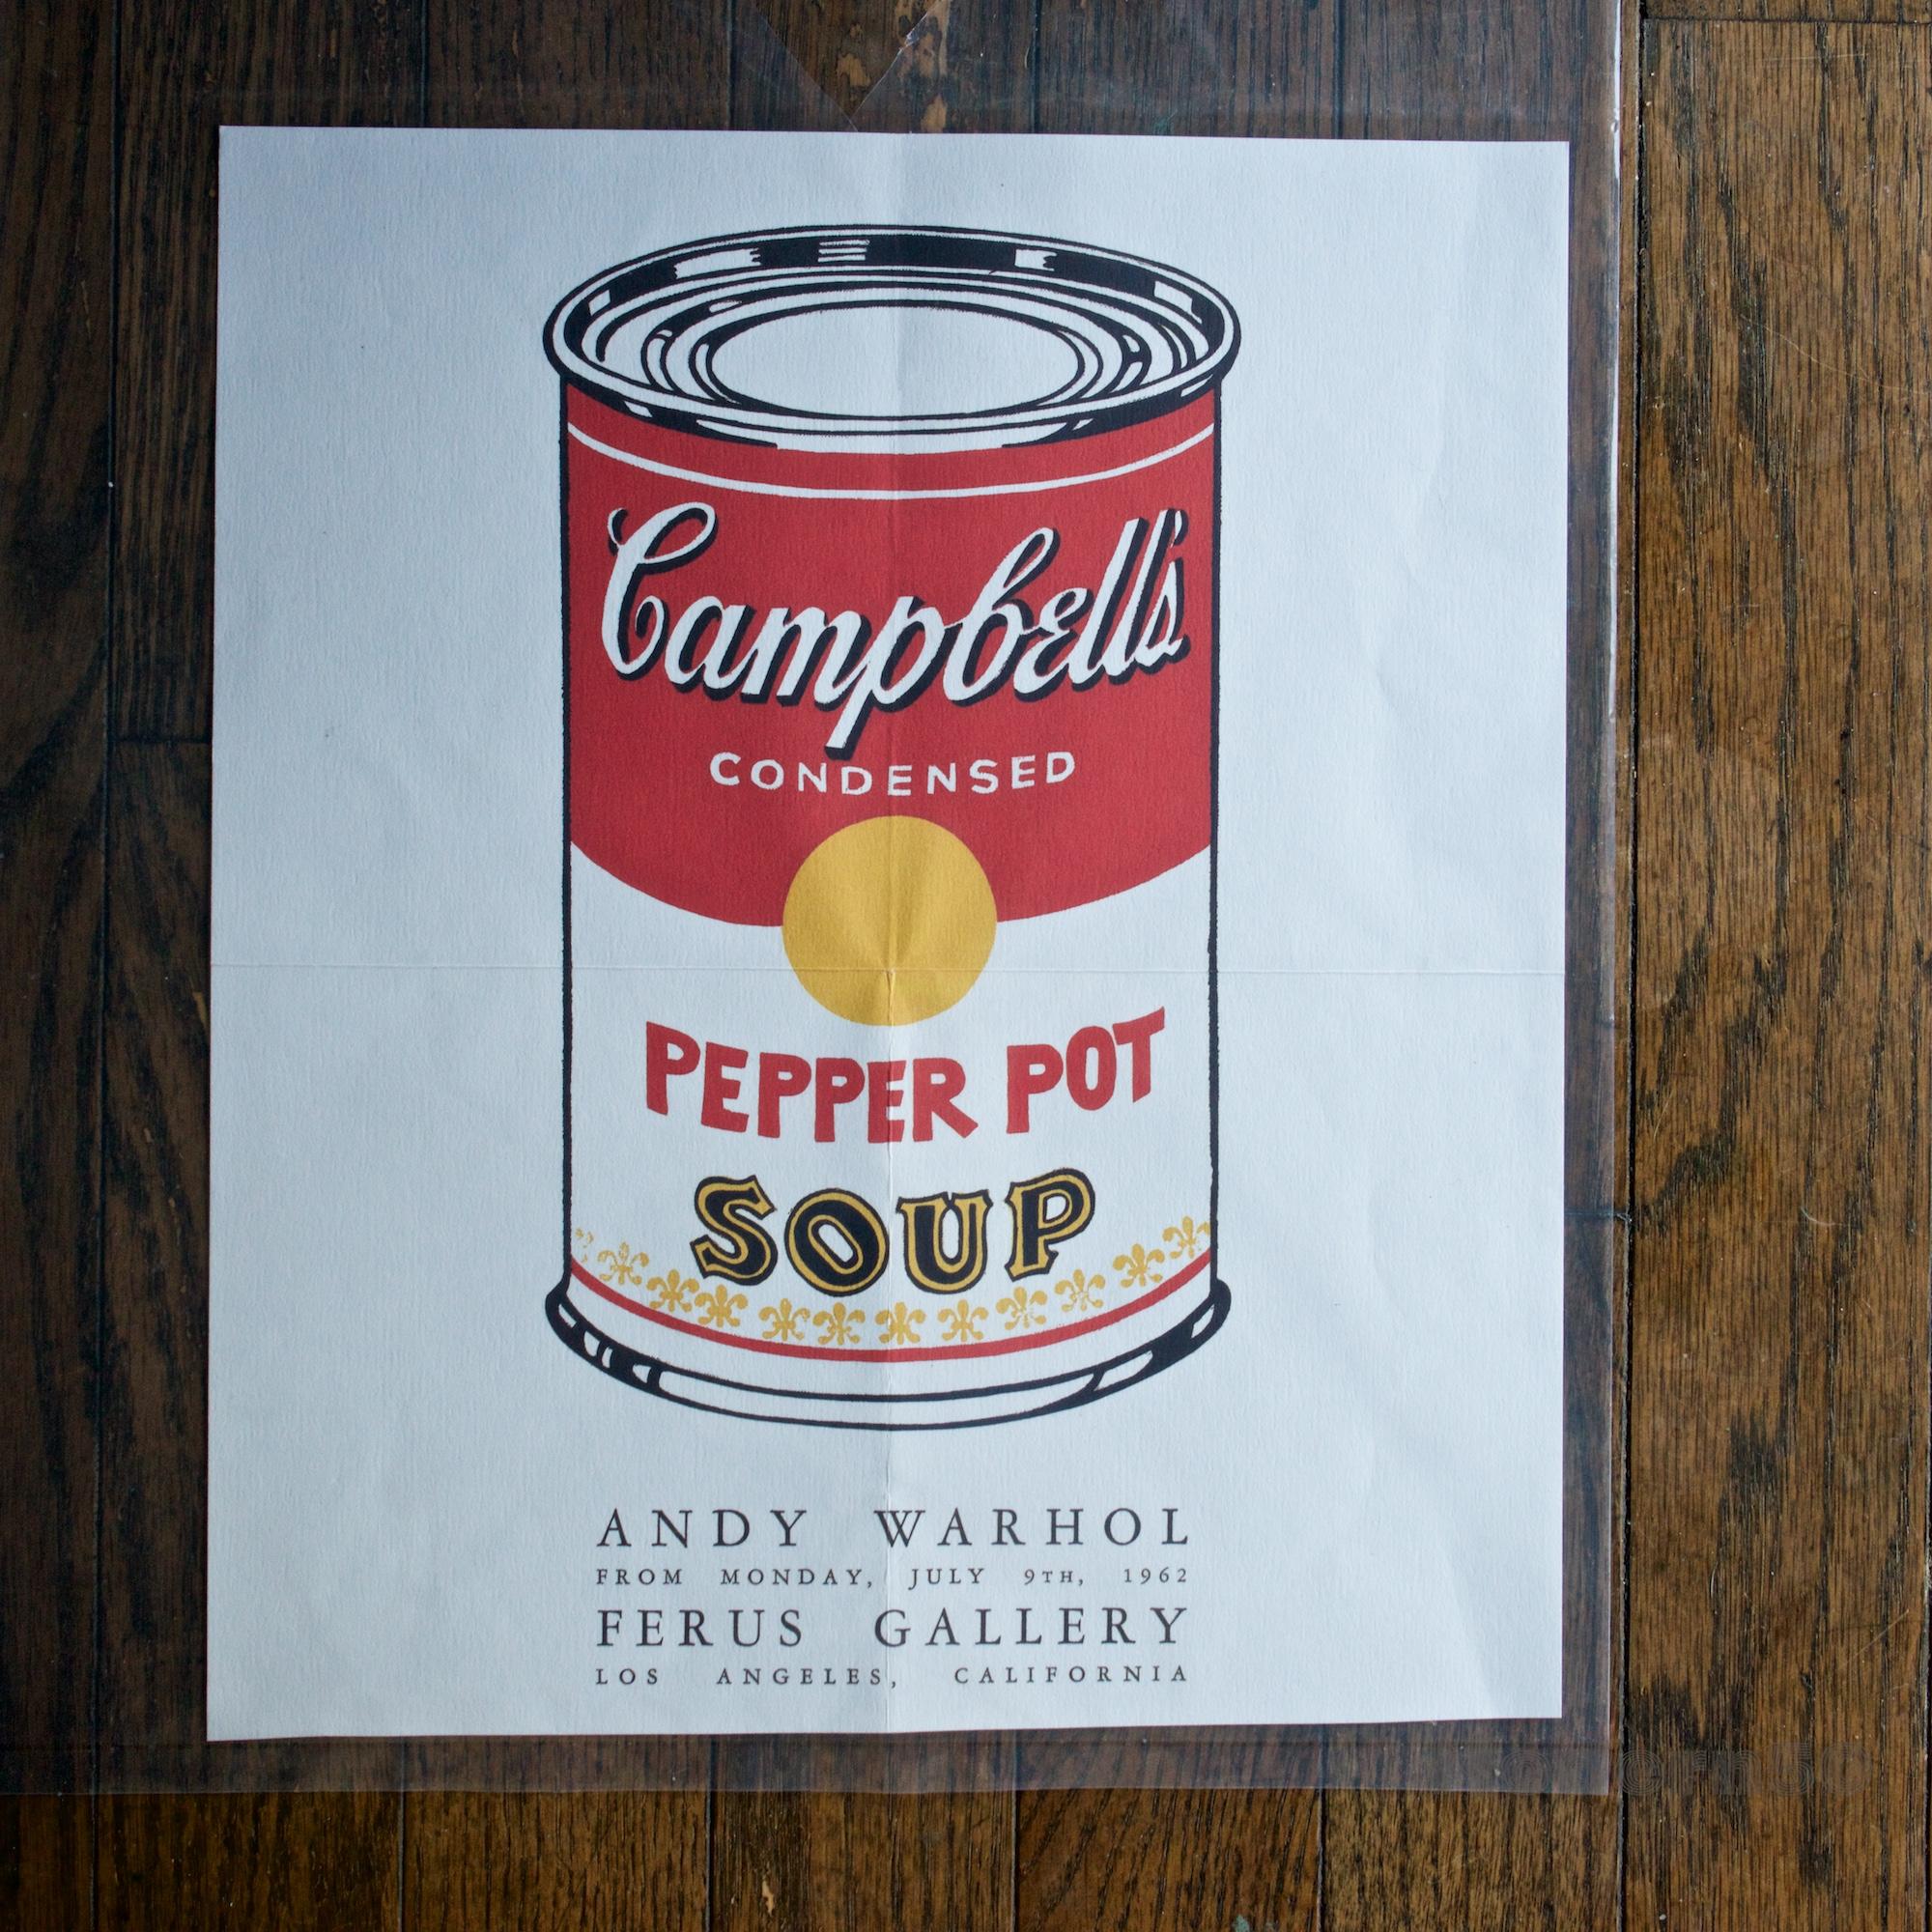 This is an unauthenticated offset lithograph promotional mailer or gallery announcement card of the first pop art show of the Campbell's Soup Can Paintings at the Ferus Gallery in Los Angeles. Ferus Gallery Director Irving Blum famously became the